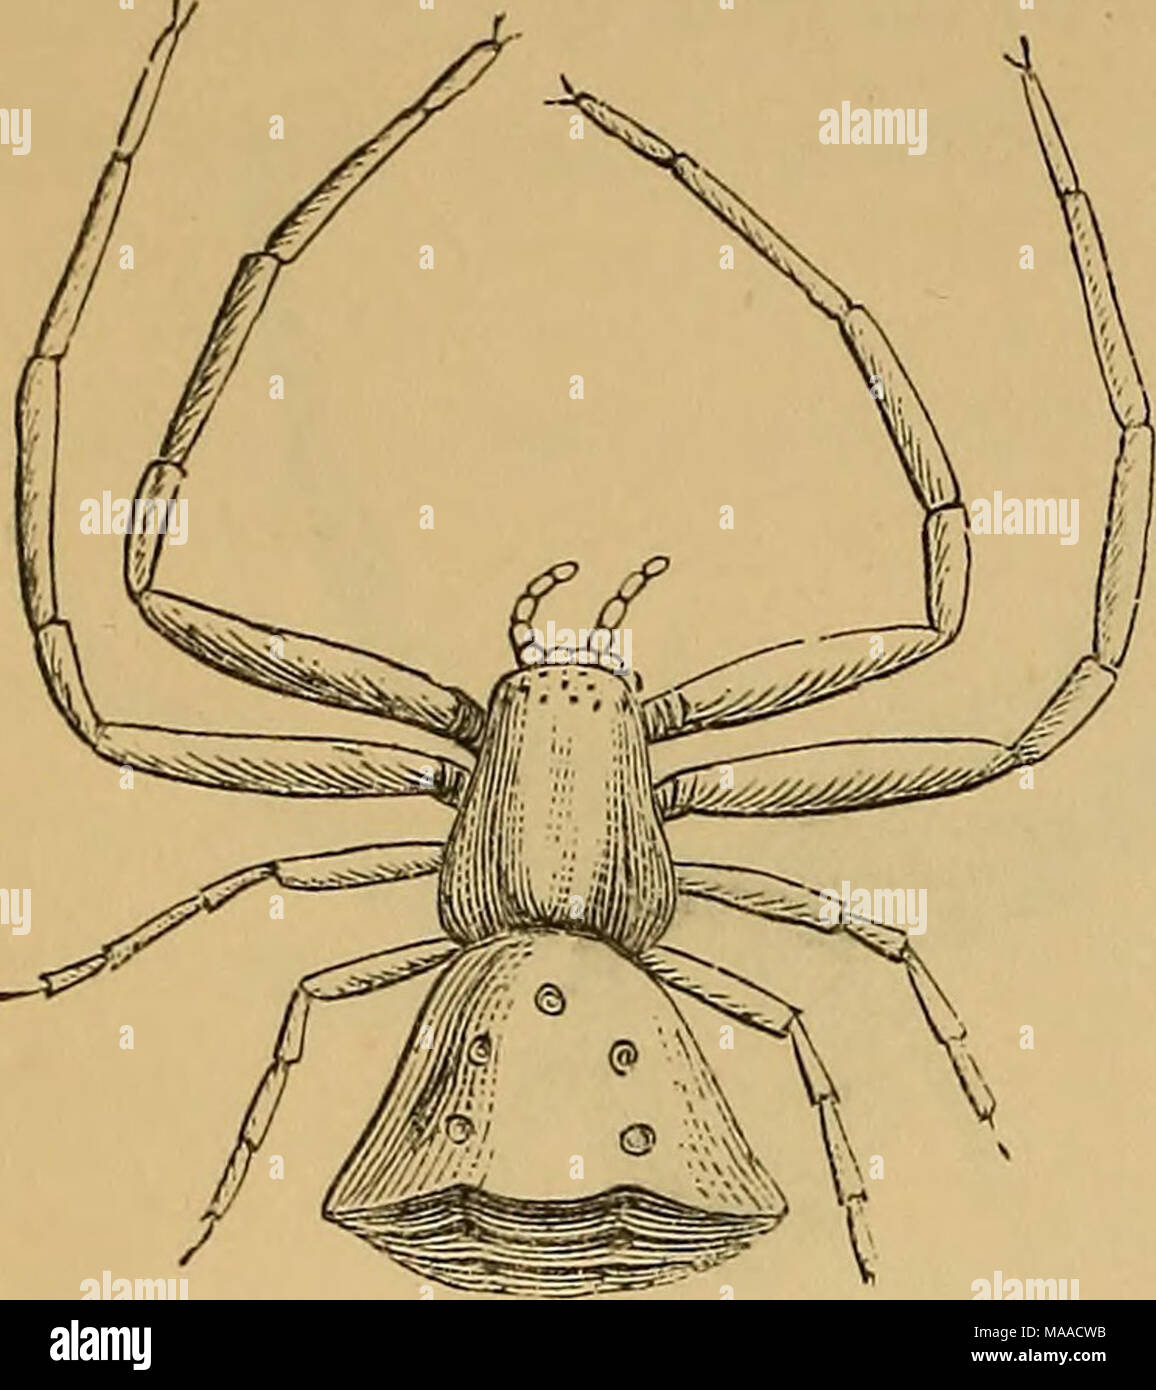 . Economic entomology . 88 ARACHNOIDEA. CASE Xysticus PINI {HaJiu), Thomisus audax, Bl.—W. Enlarged sketch of ditto. VII. No. II. Similar in appearance to the last. No. 12. Thomisus onustus {Walck. Th. abbreviatus, BL—2. Enlarged sketch of ditto. A yellow species with the ab- domen so much turned down as to appear abruptly truncate. DiyEA DORSATA (ivz^.), Thomisus flori- colens, Bl.—13. Enlarged figure of ditto. Found in chalk and limestone districts; the male and female differ much in appearance. The female has the cephalo-thorax Thomisus abbreviatus (slightly magnified). 2Xld^ ICgS grCCn,  Stock Photo